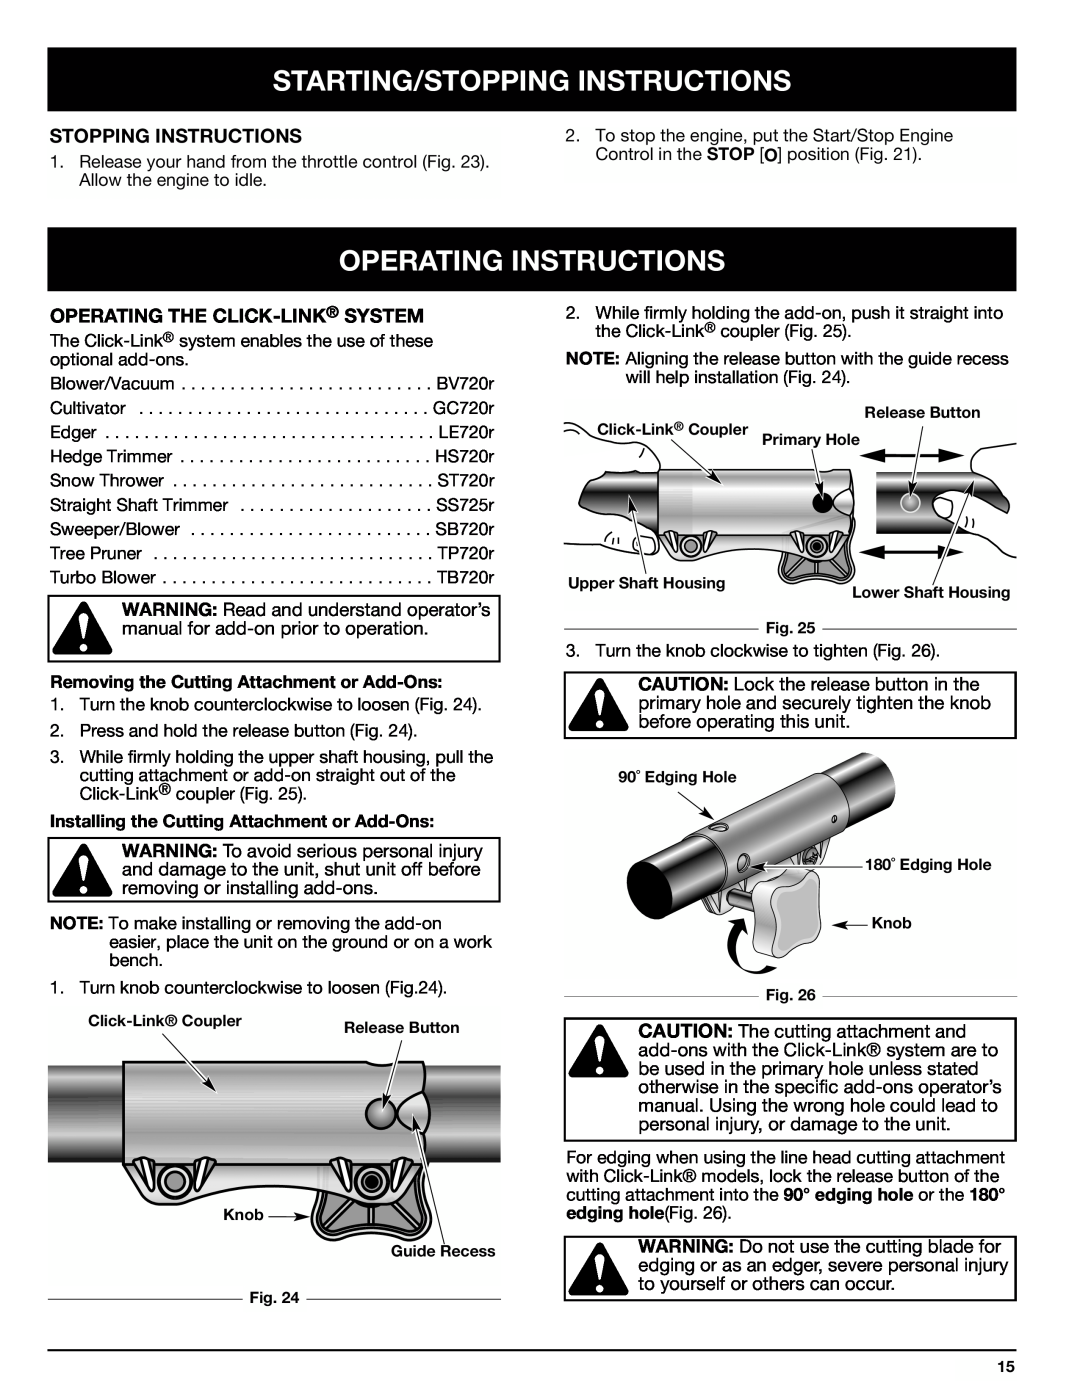 Ryobi 890r manual Operating Instructions, Operating The Click-Link System, Starting/Stopping Instructions 